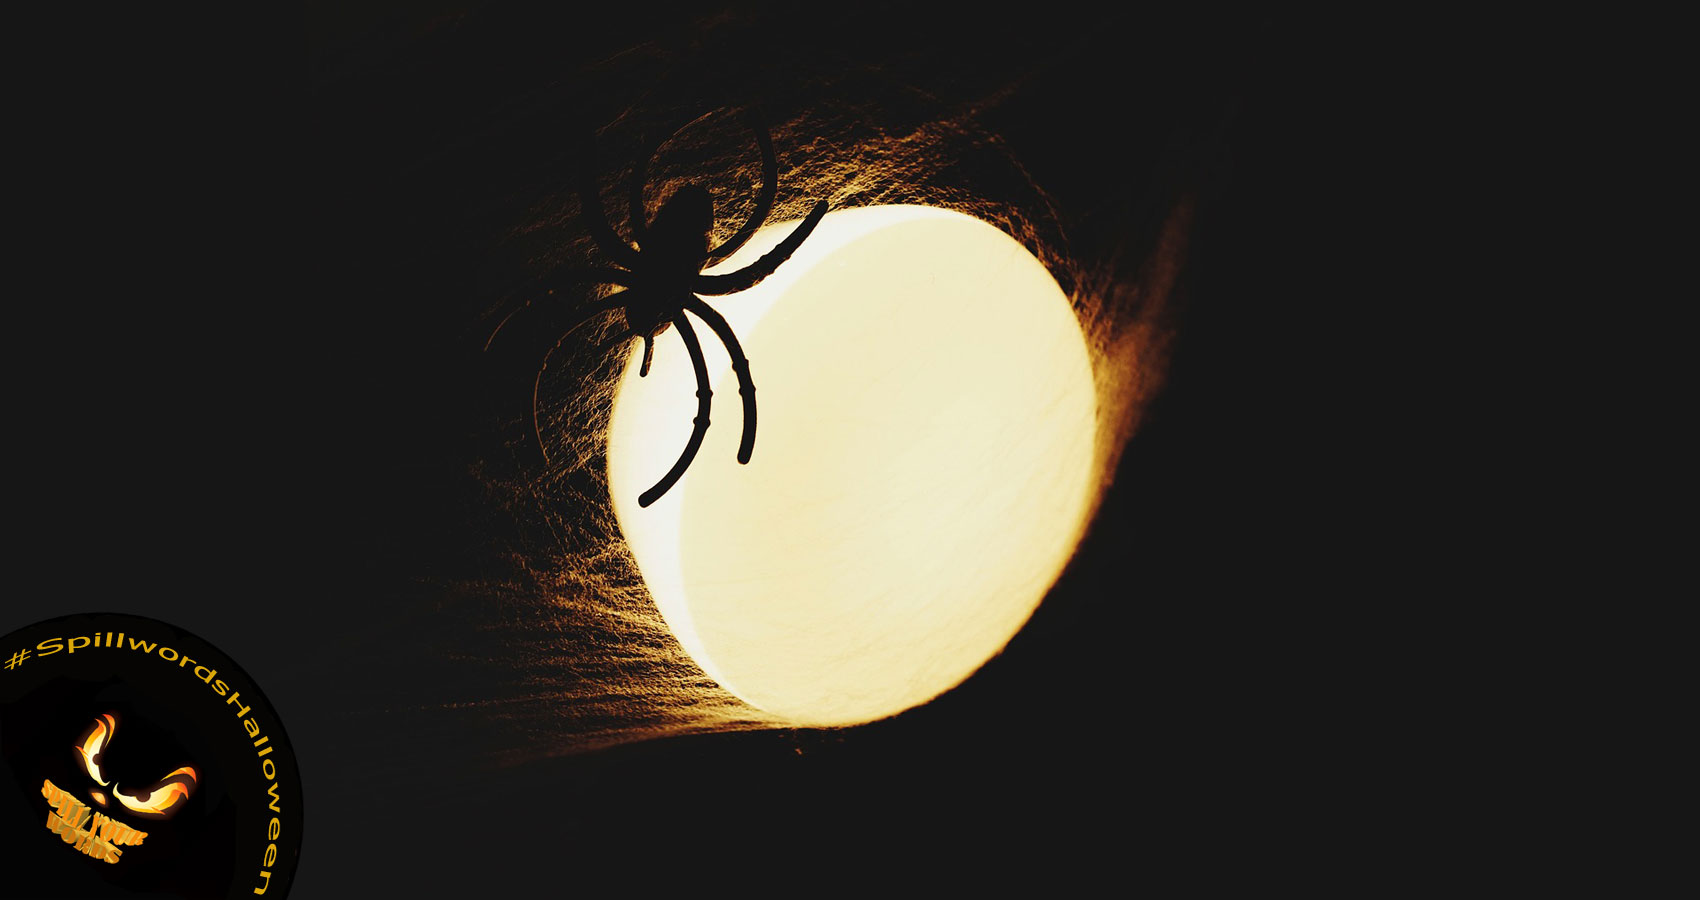 The Spider, a micropoem written by Rich at Spillwords.com